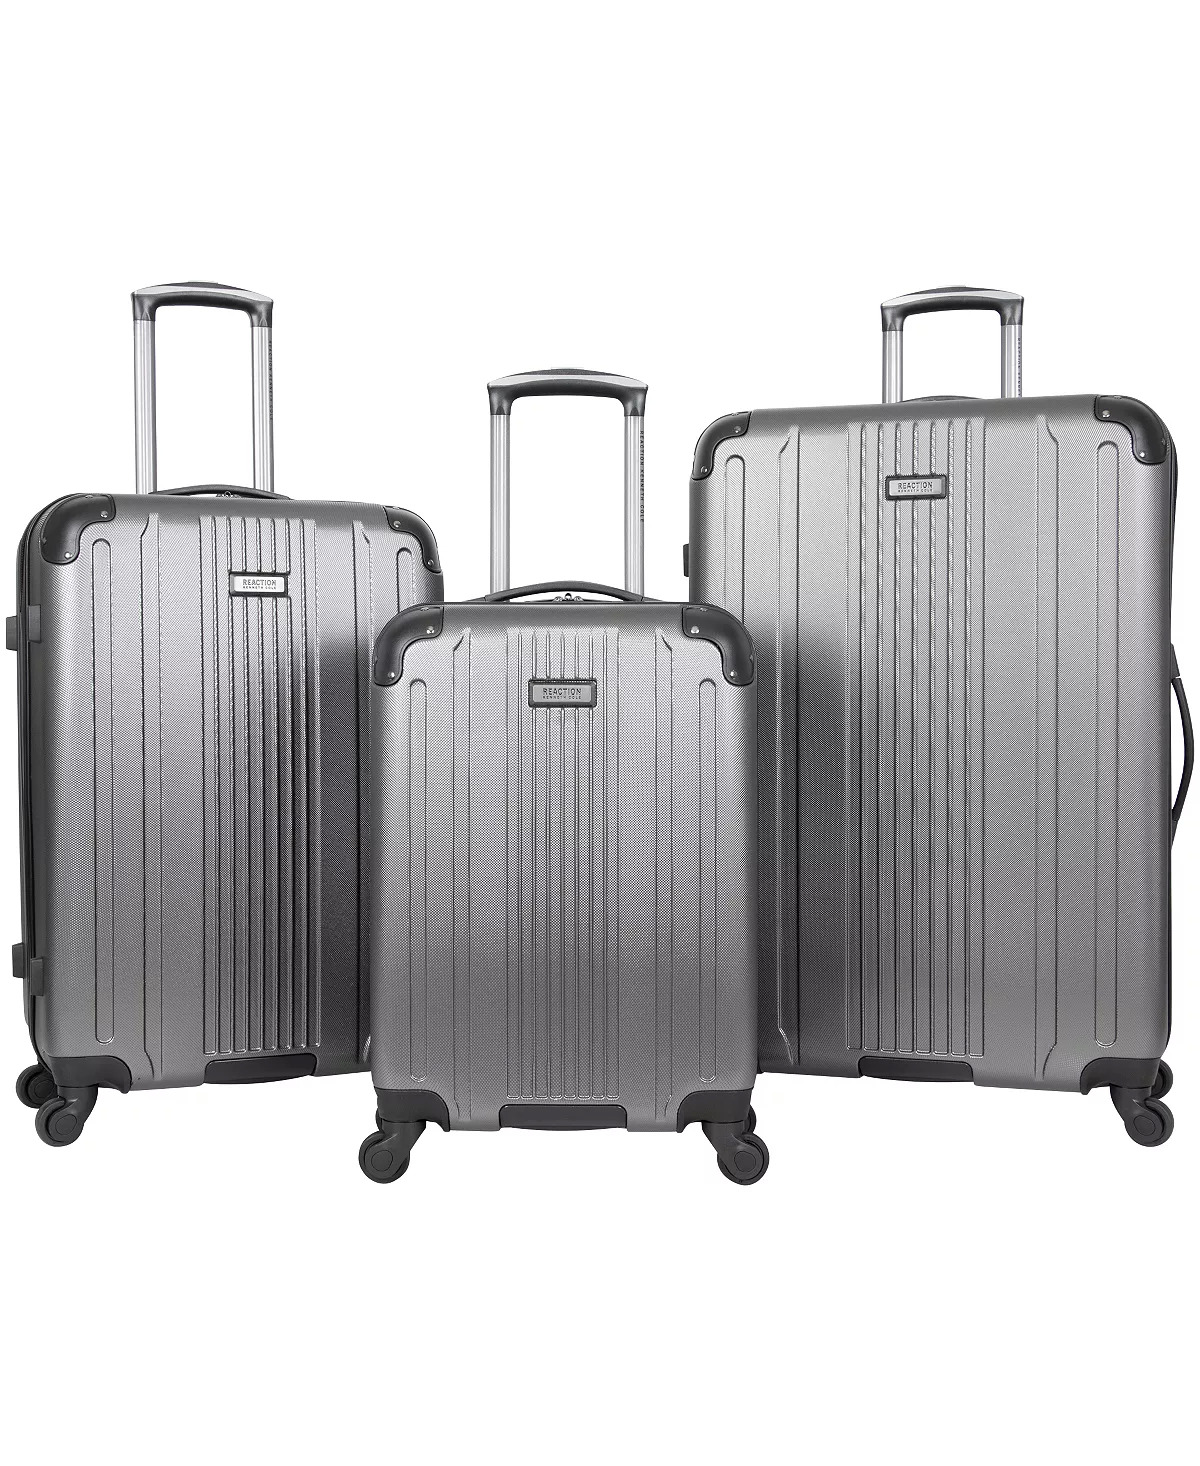 3-Piece Kenneth Cole Reaction South Street Hardside Luggage Set (2 Colors) $180 + Free Shipping